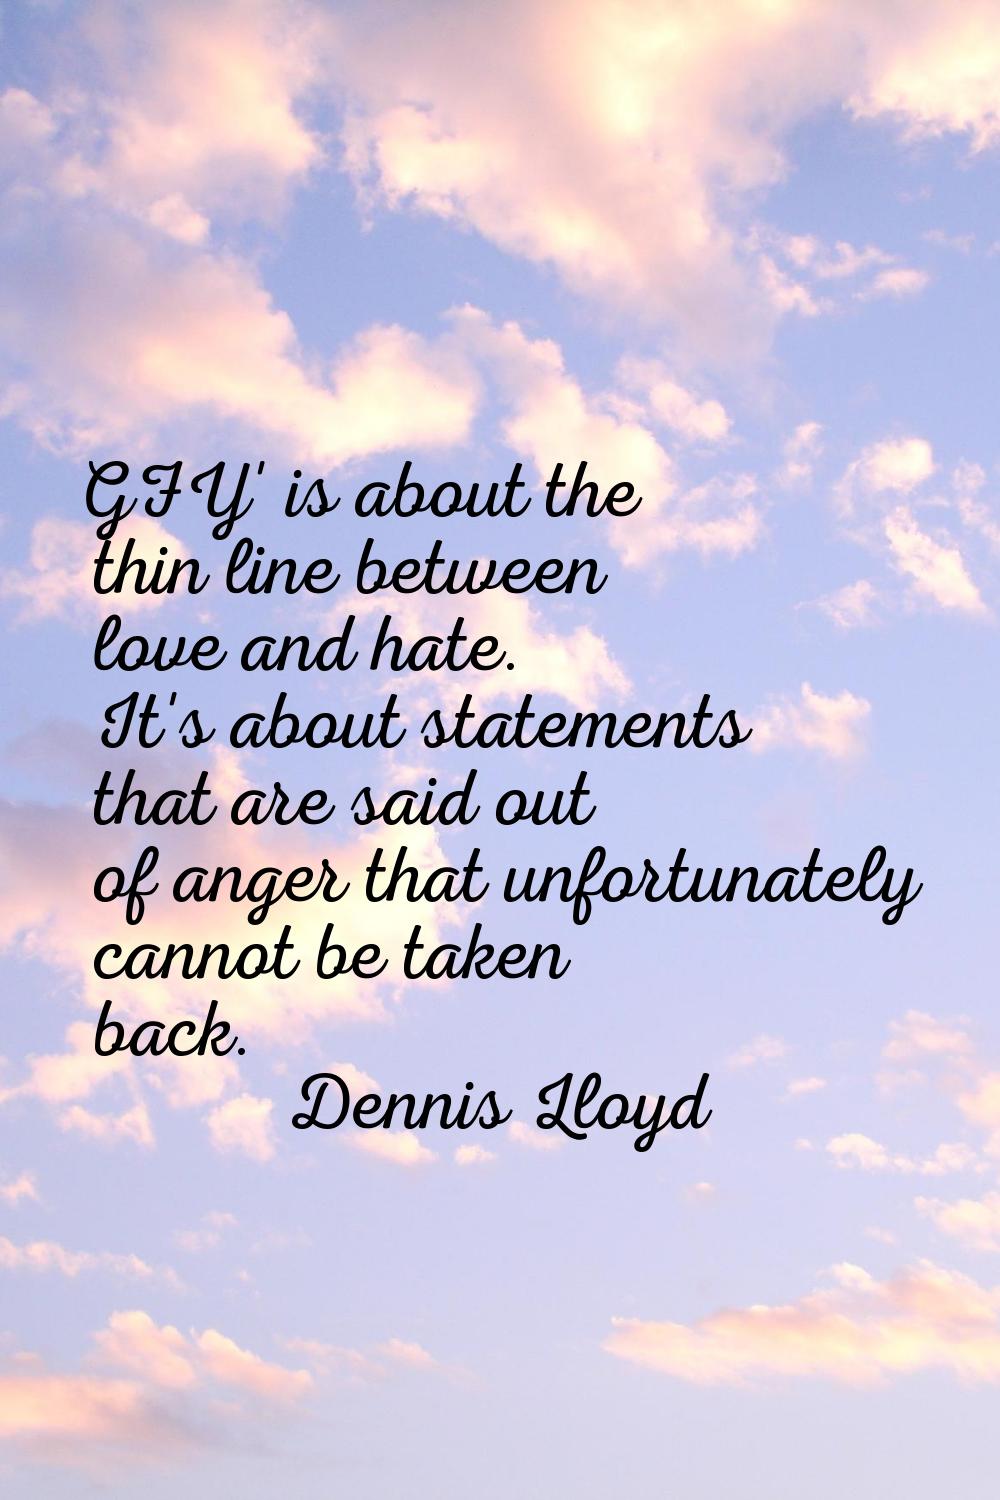 GFY' is about the thin line between love and hate. It's about statements that are said out of anger